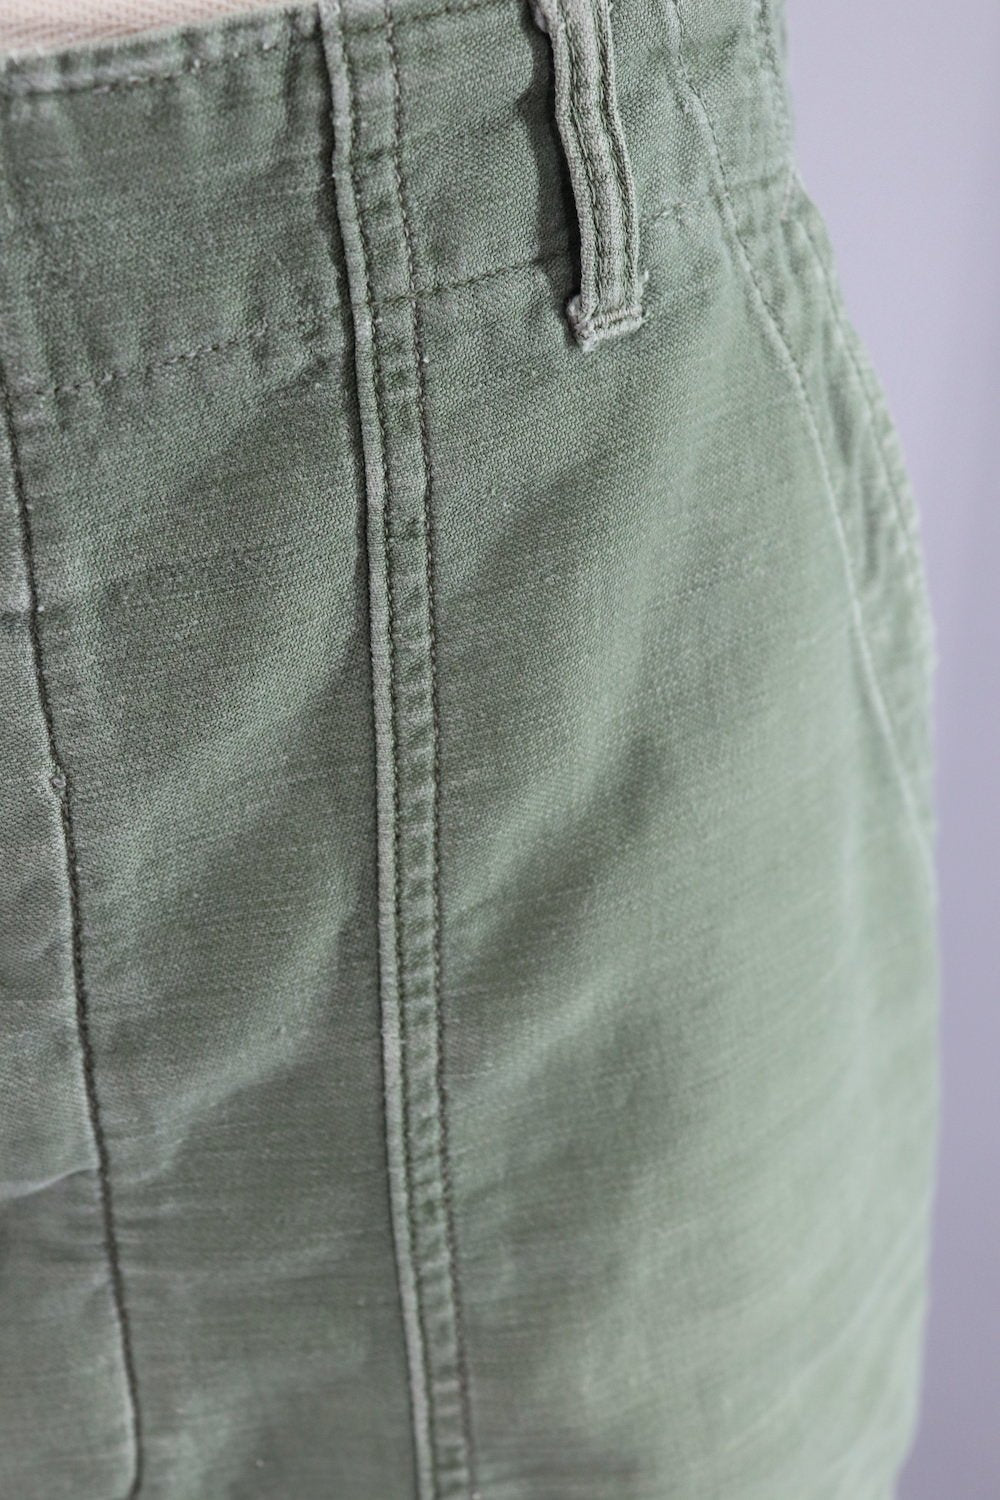 Vintage 1950s-1960s US Army Pants / OG-107 Olive Drab - ThisBlueBird